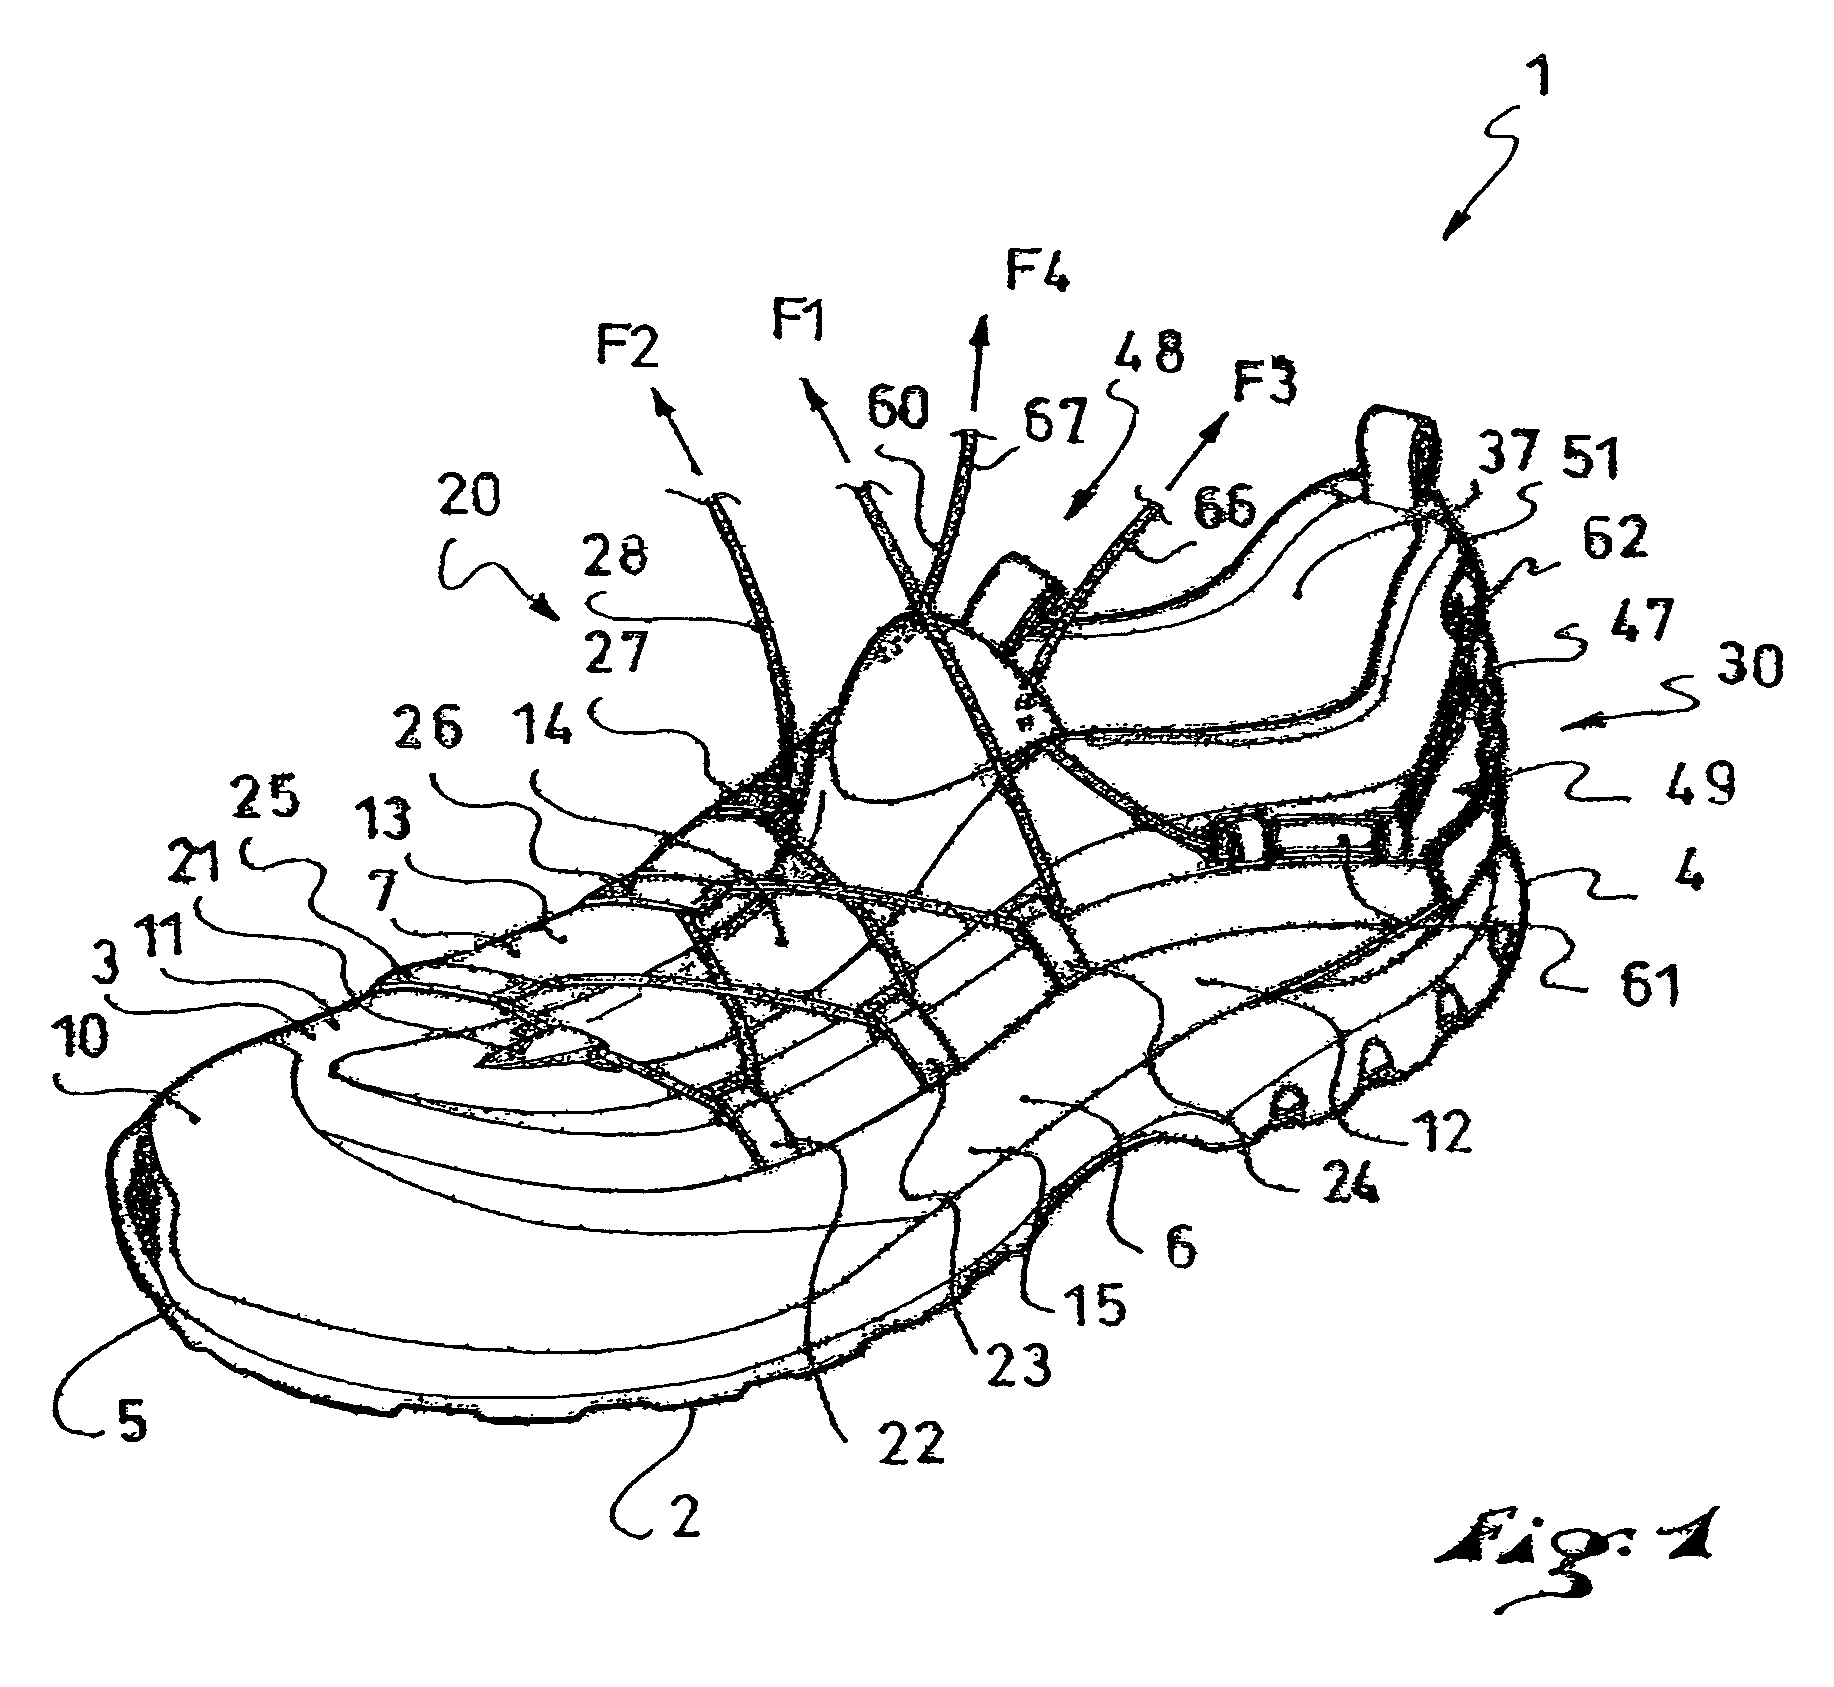 Footwear with improved heel support